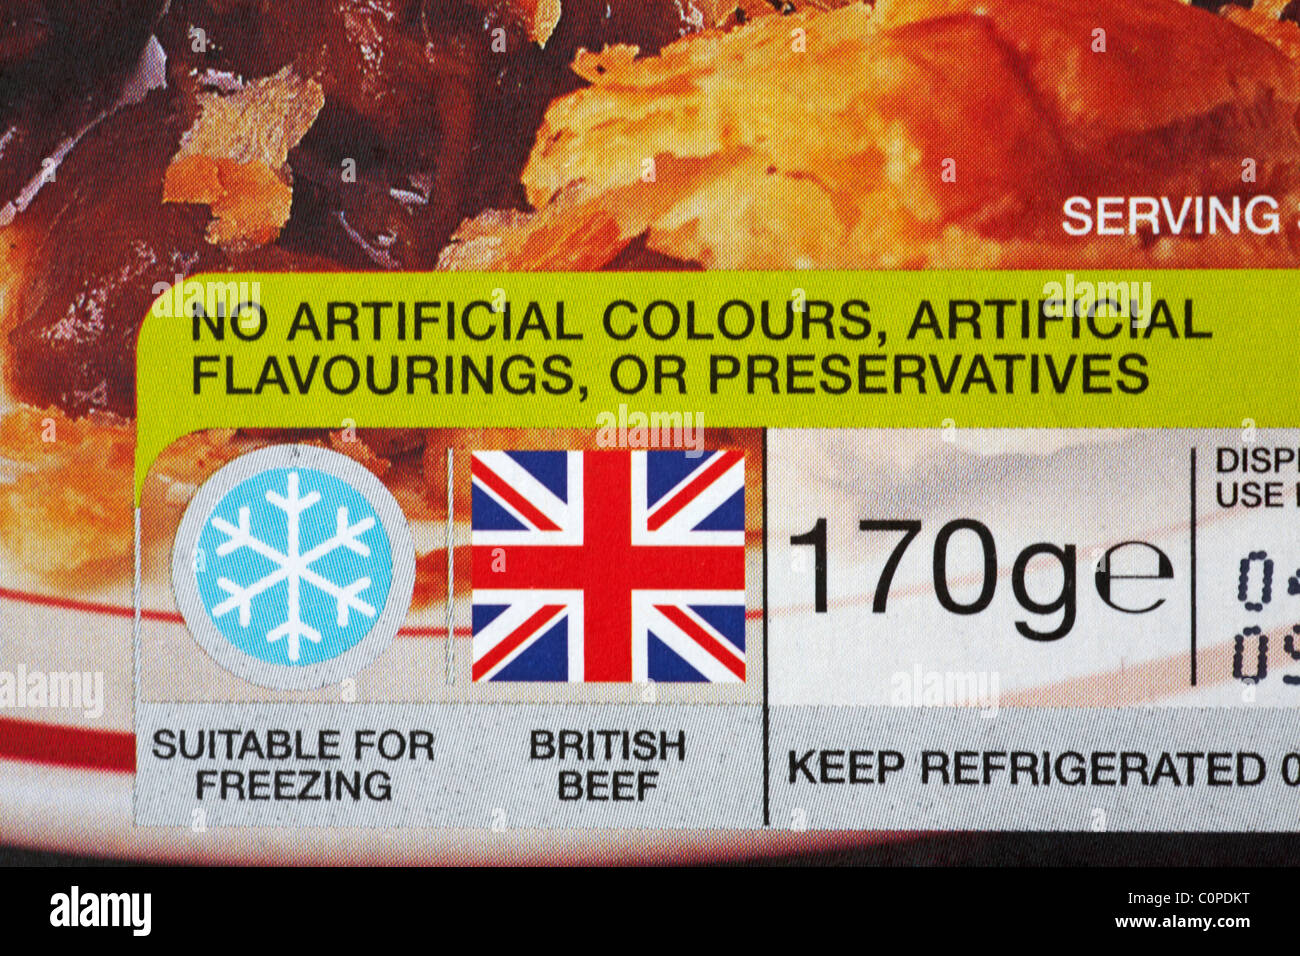 Information on front of a Marks & Spencer Scottish Steak pie box Stock Photo